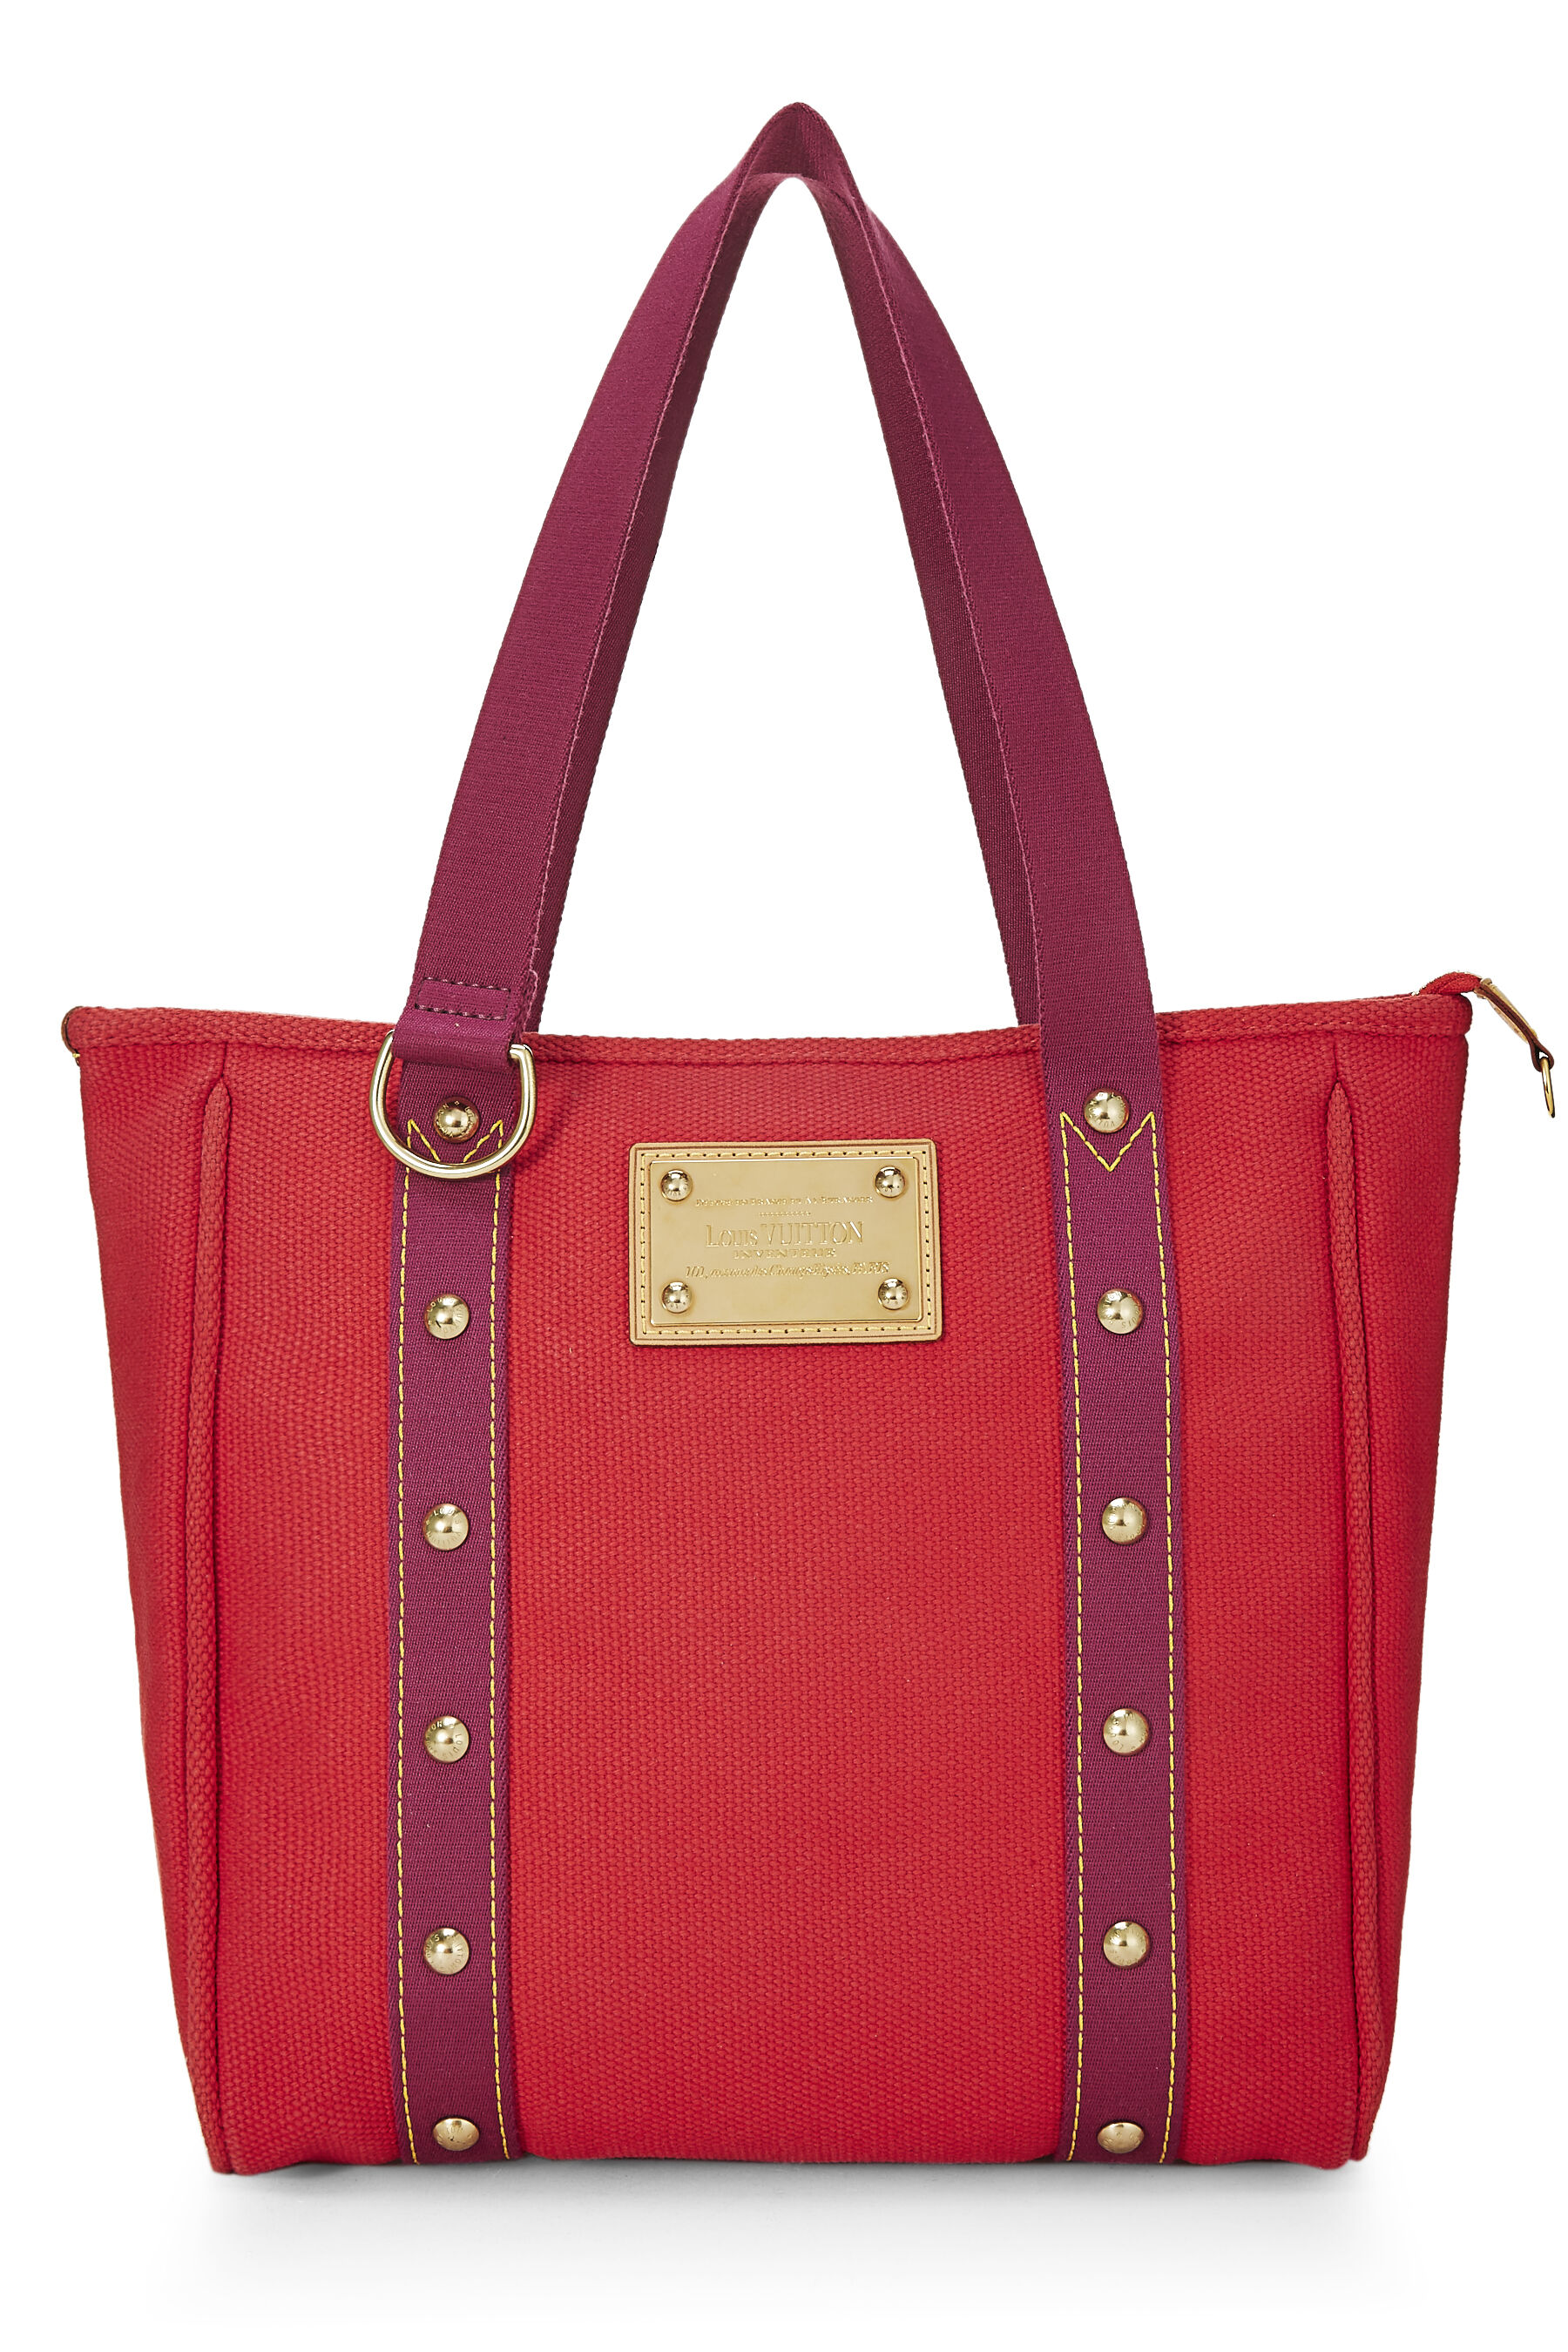 Louis Vuitton Cabas PM M40037 Red Purple Canvas Hand Bag USED 0901A